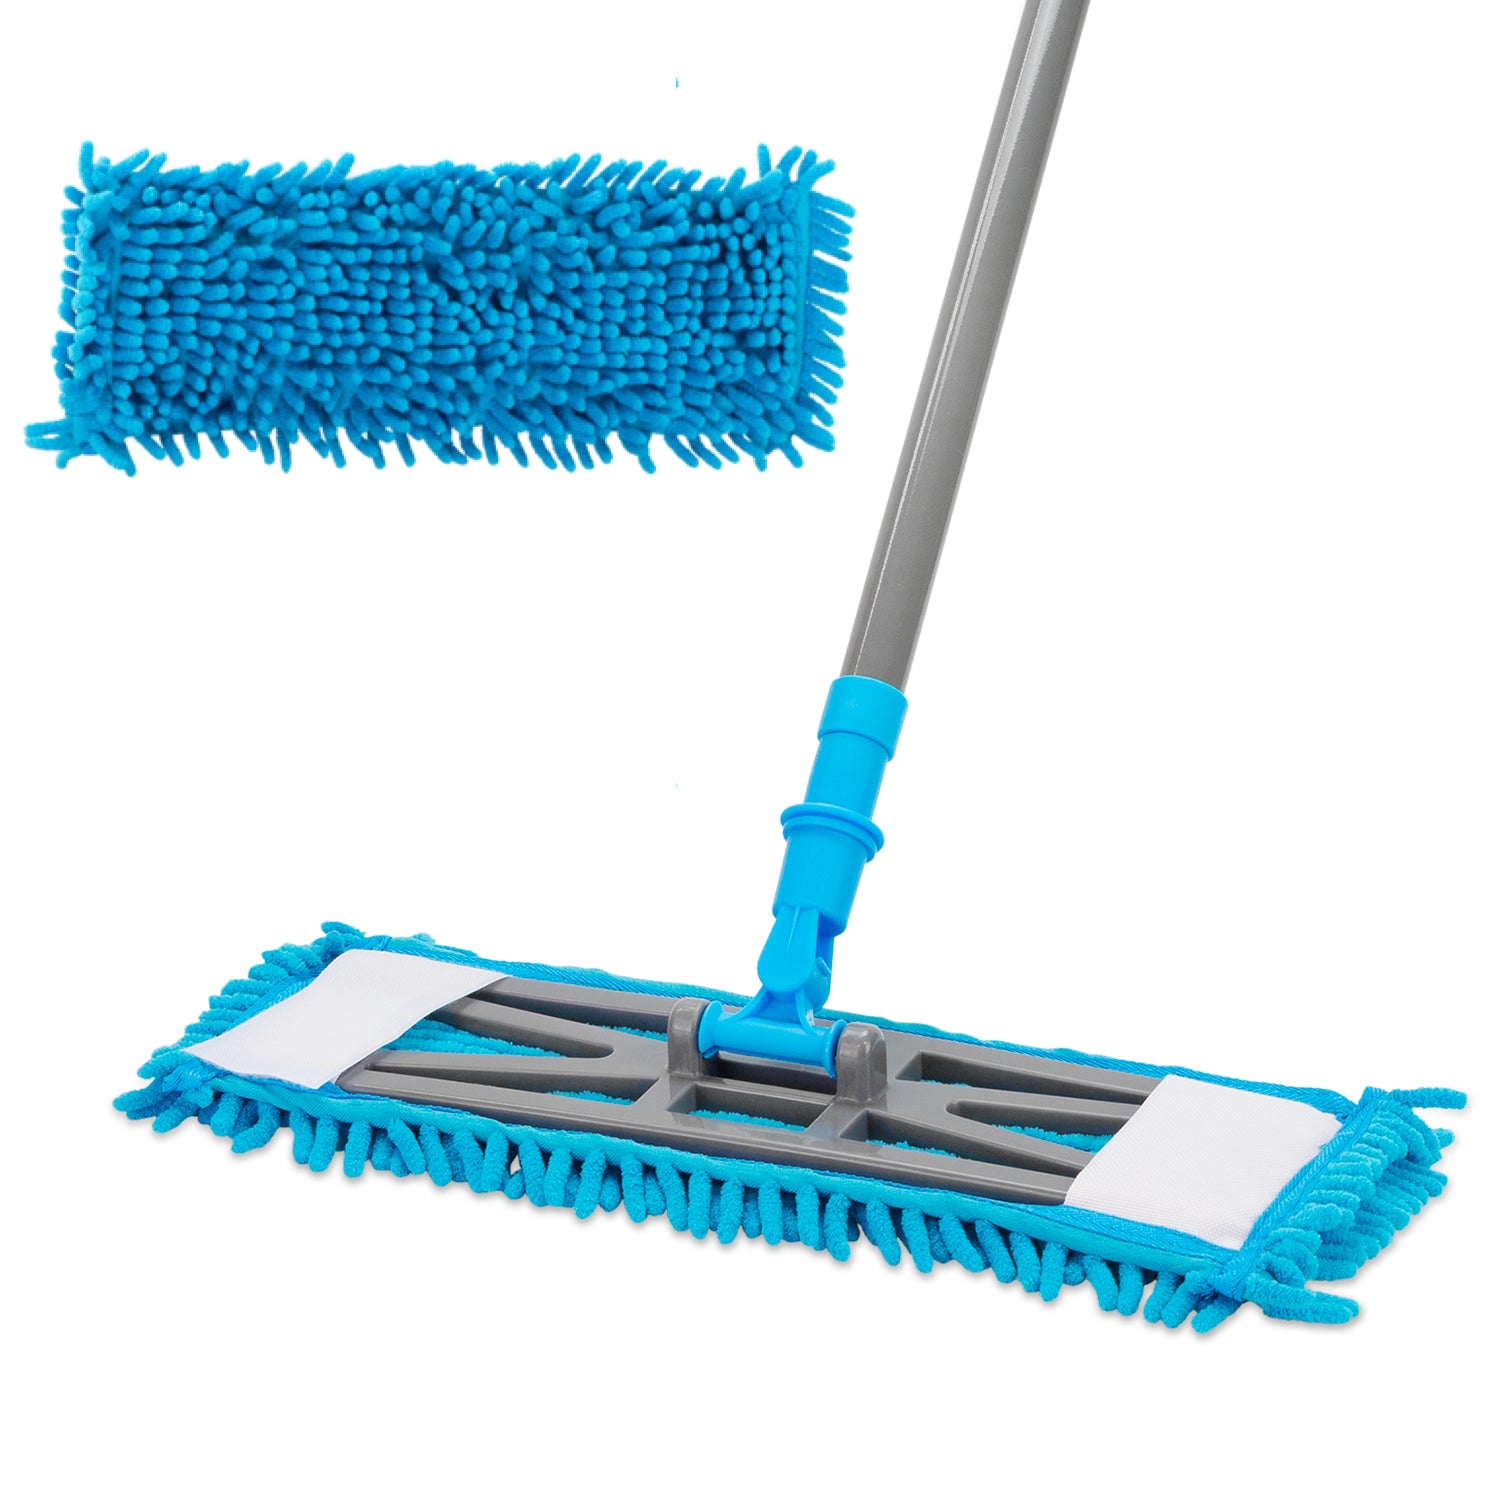 Super Absorbent Chenille Mop - Tackle Wet & Dry Spills And